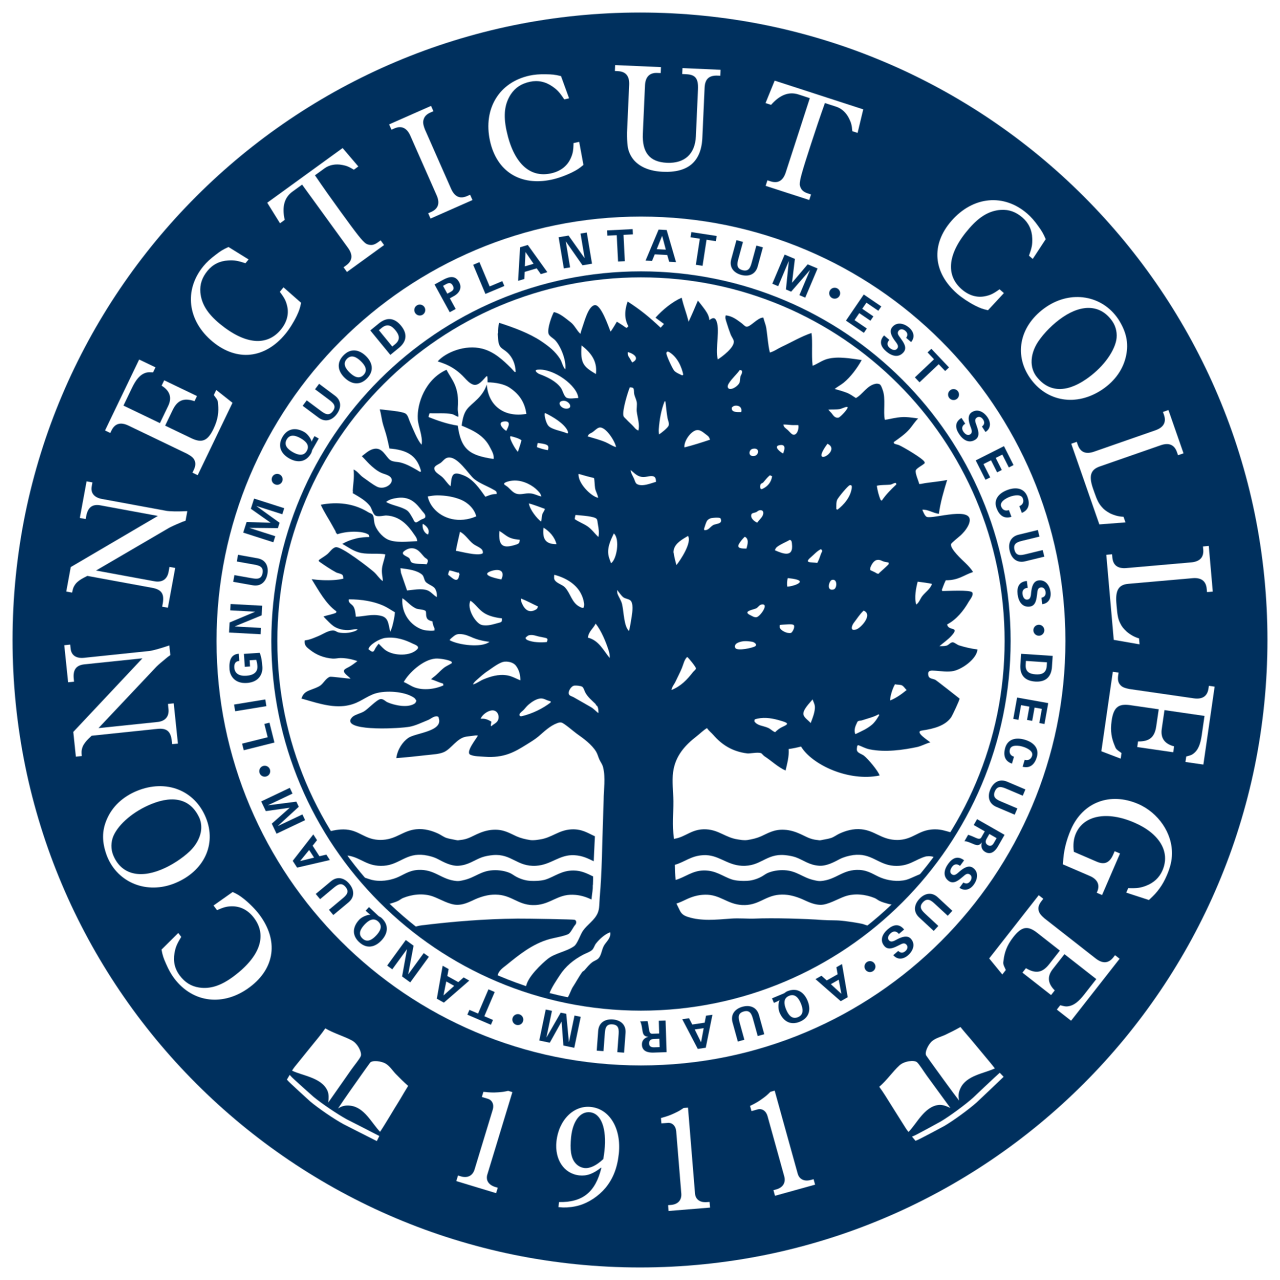 Formal_Seal_of_Connecticut_College,_New_London,_CT,_USA.svg.png